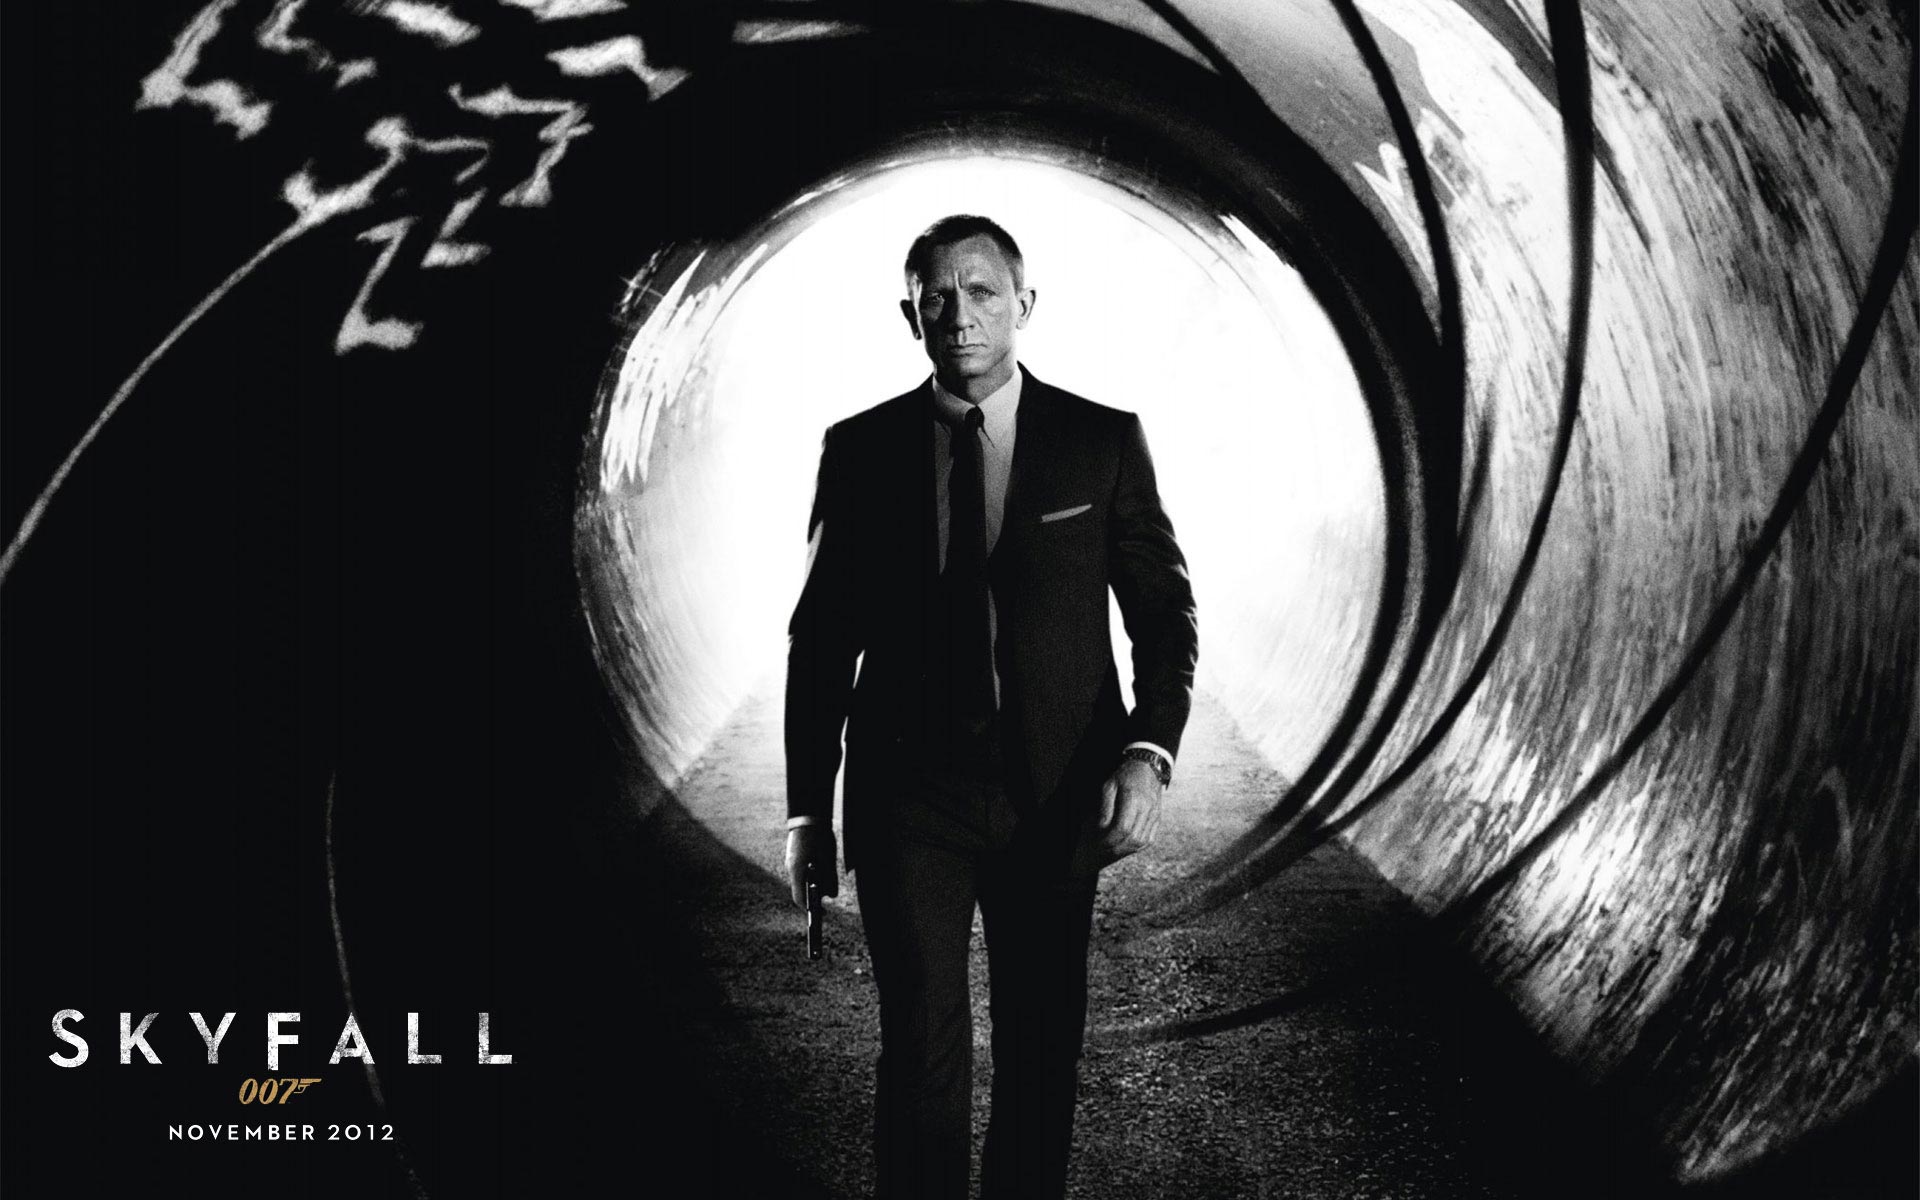 UPDATED: Skyfall HMV Exclusive Blu-ray Steelbook will be making its way to the UK